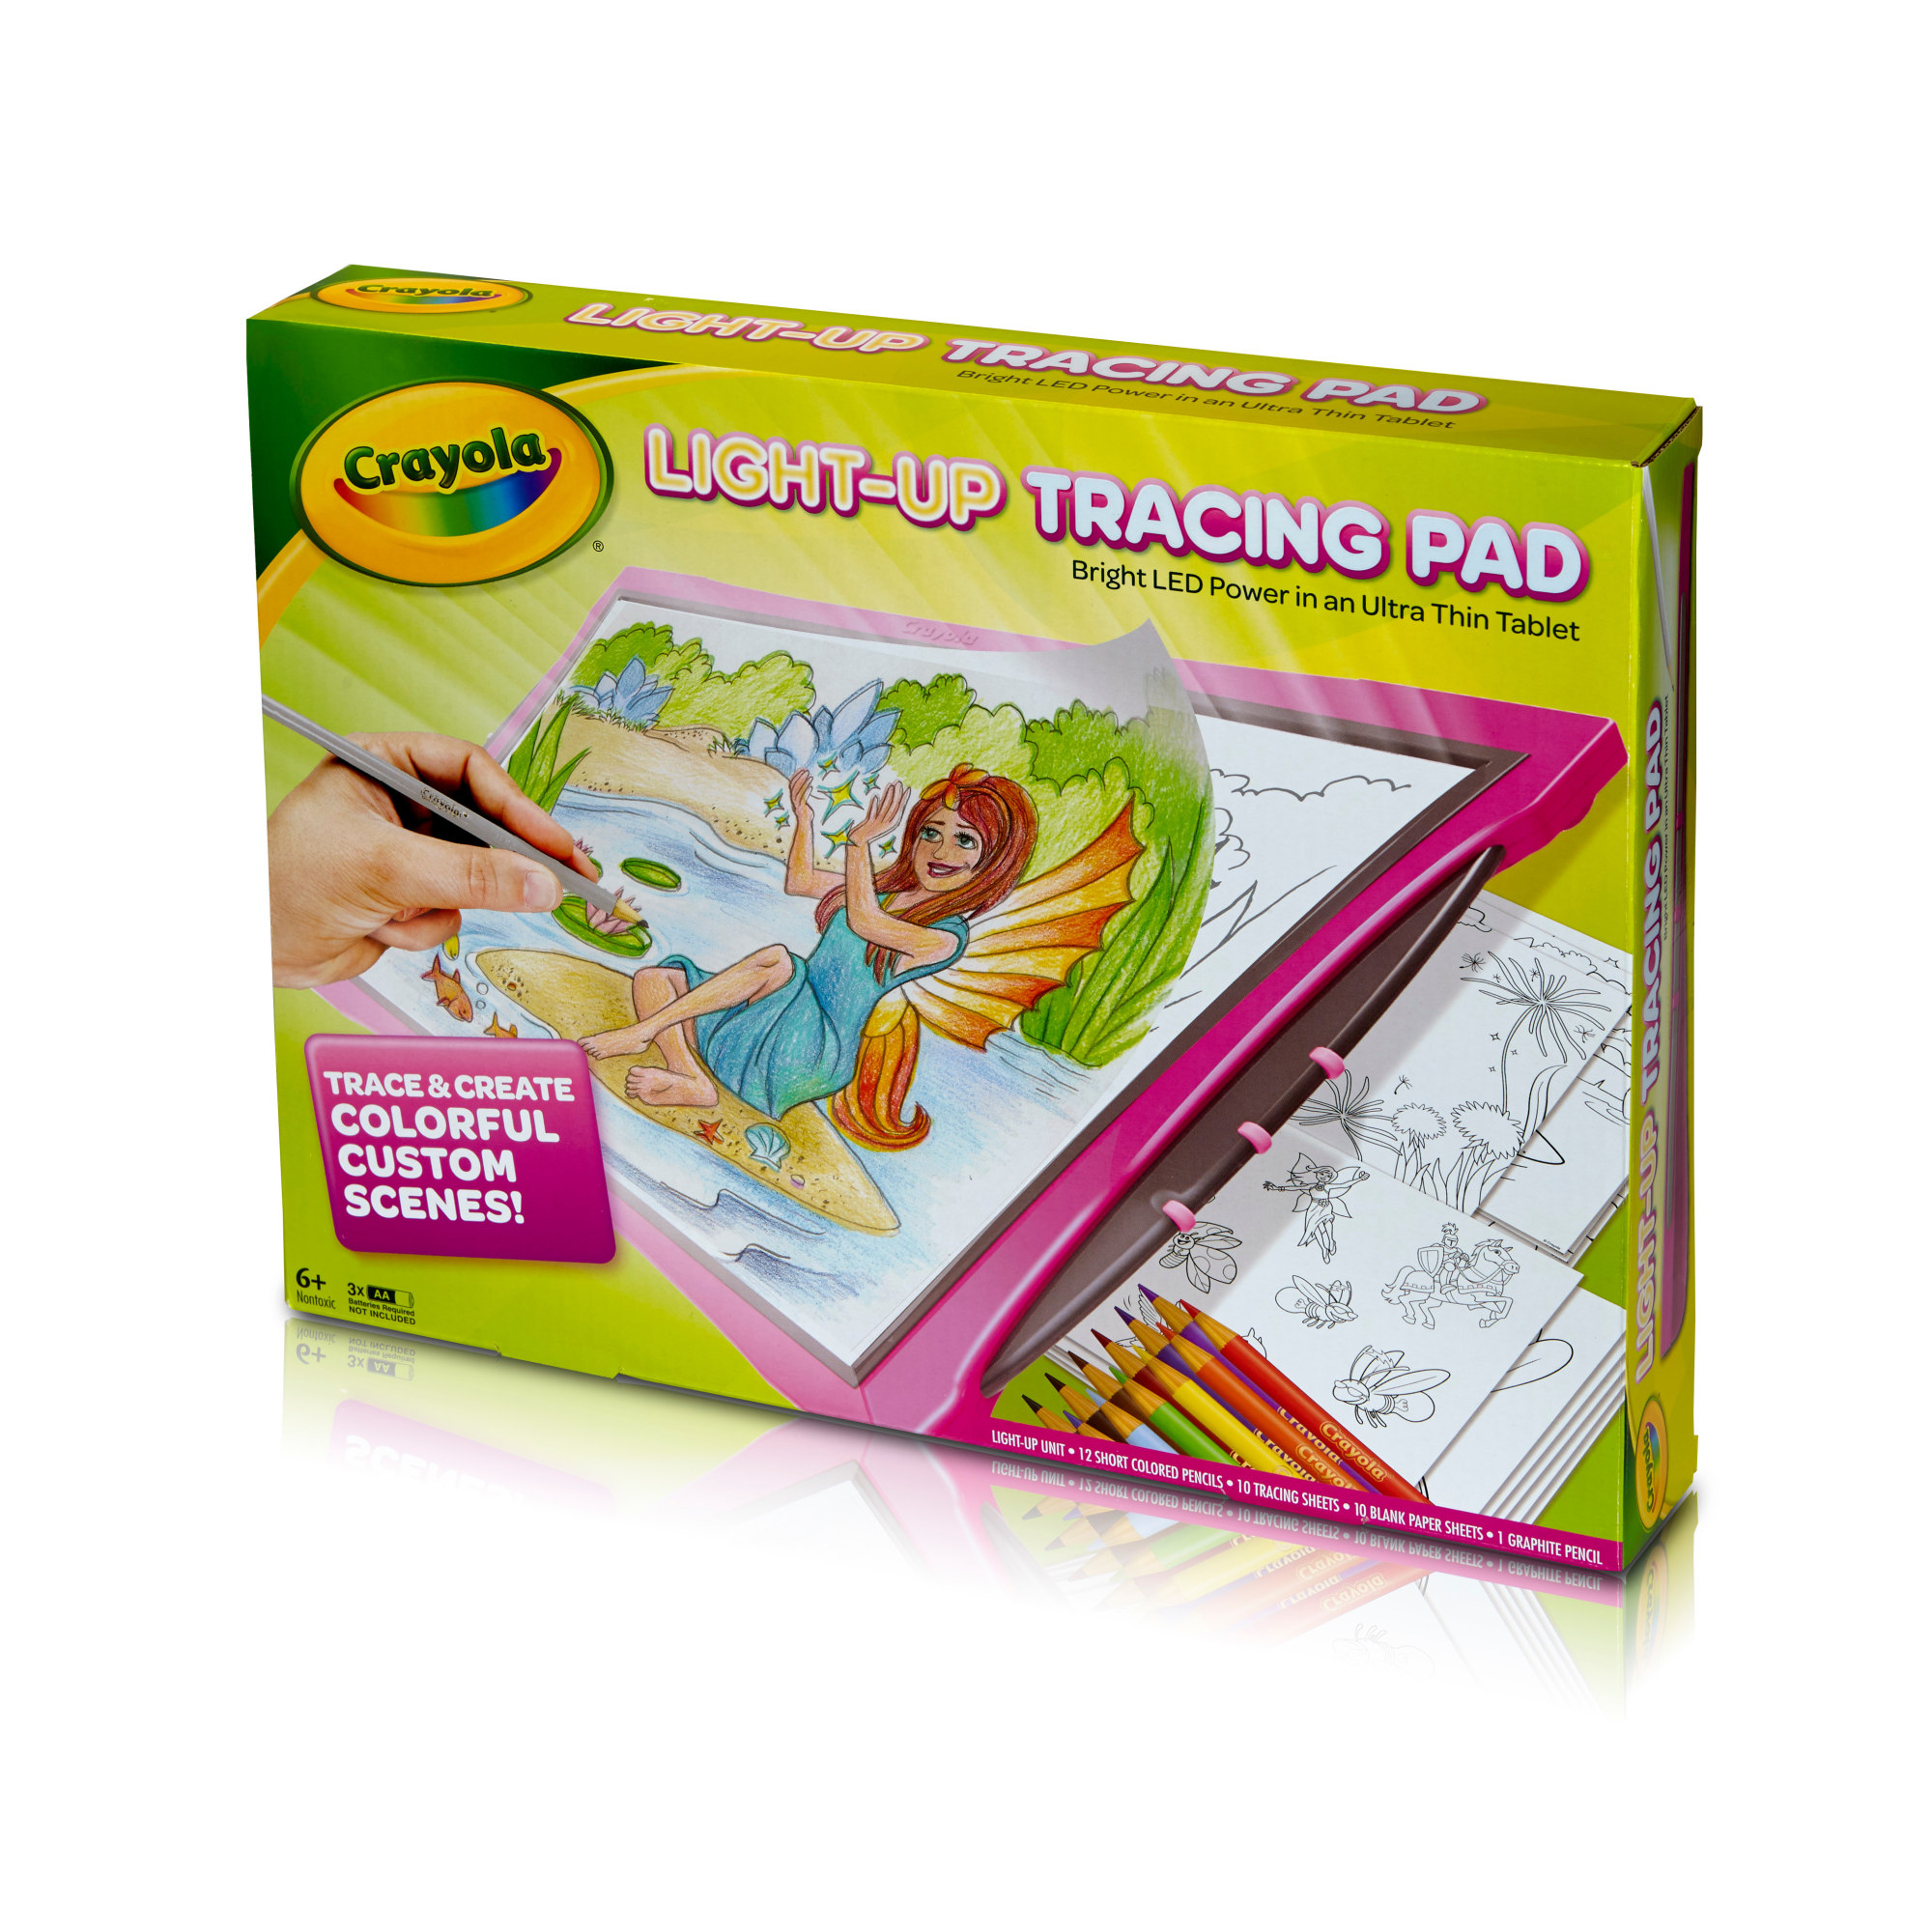 Crayola Light-up Tracing Pad Pink, Gifts for Unisex Child, Ages 6, 7, 8, 9 - image 3 of 7